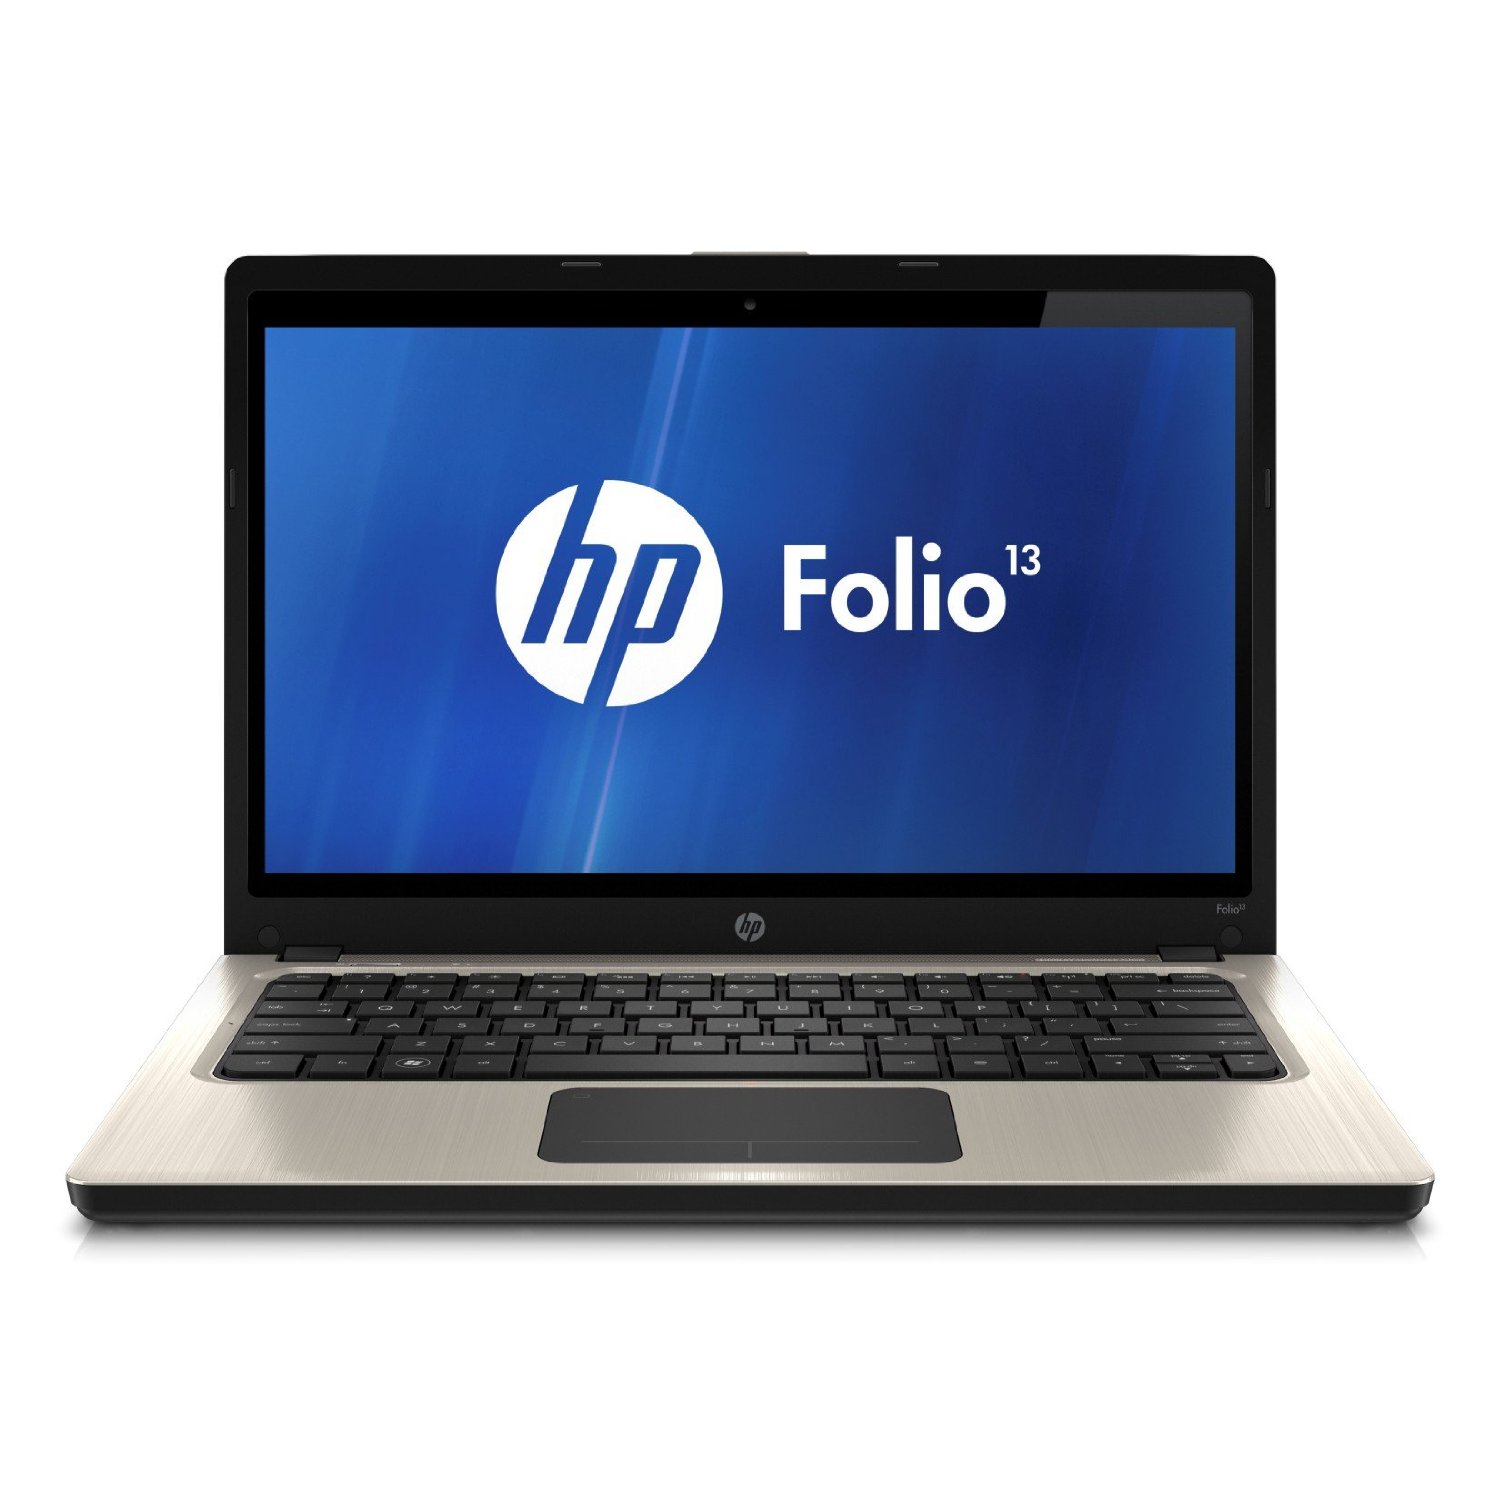 http://thetechjournal.com/wp-content/uploads/images/1201/1327849265-hp-folio-131020us-133inch-laptop-3.jpg